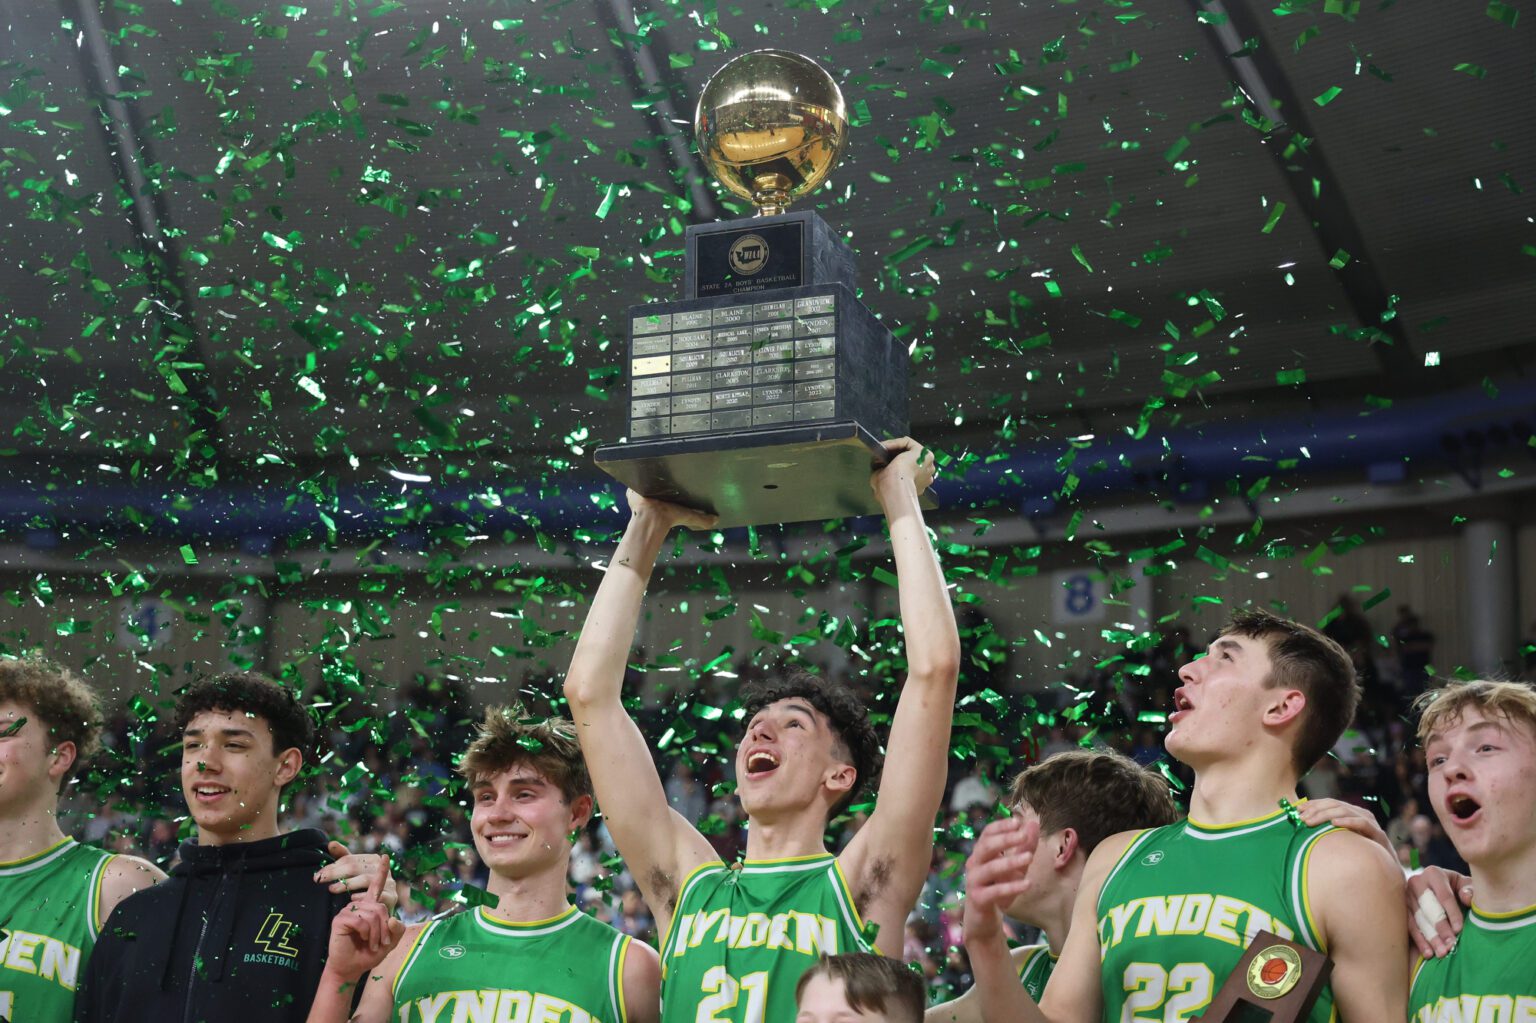 Lynden players celebrate as confetti rains down on them Saturday, March 2 after the Lions beat Grandview, 85-54, to complete the first three-peat in 2A state history at the Yakima Valley SunDome.